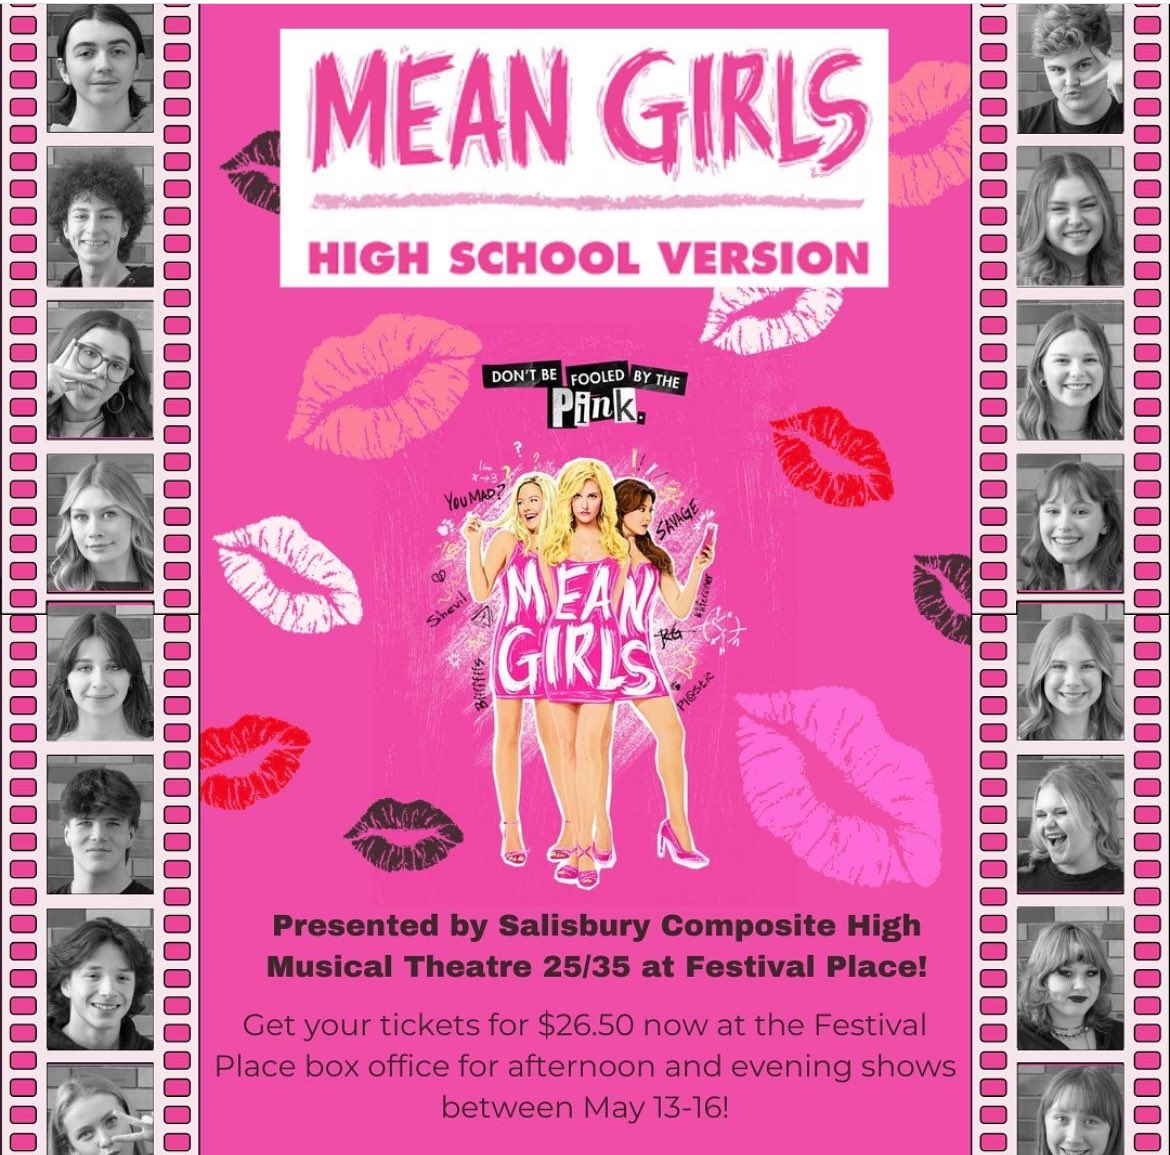 Have you got your tickets yet? Head to the Festival Place website to get your tickets now! You don’t want to miss this fun show! @eips #musicaltheatre #meangirls #highschool #fetch #onwednesdayswewearpink #getyourtickets